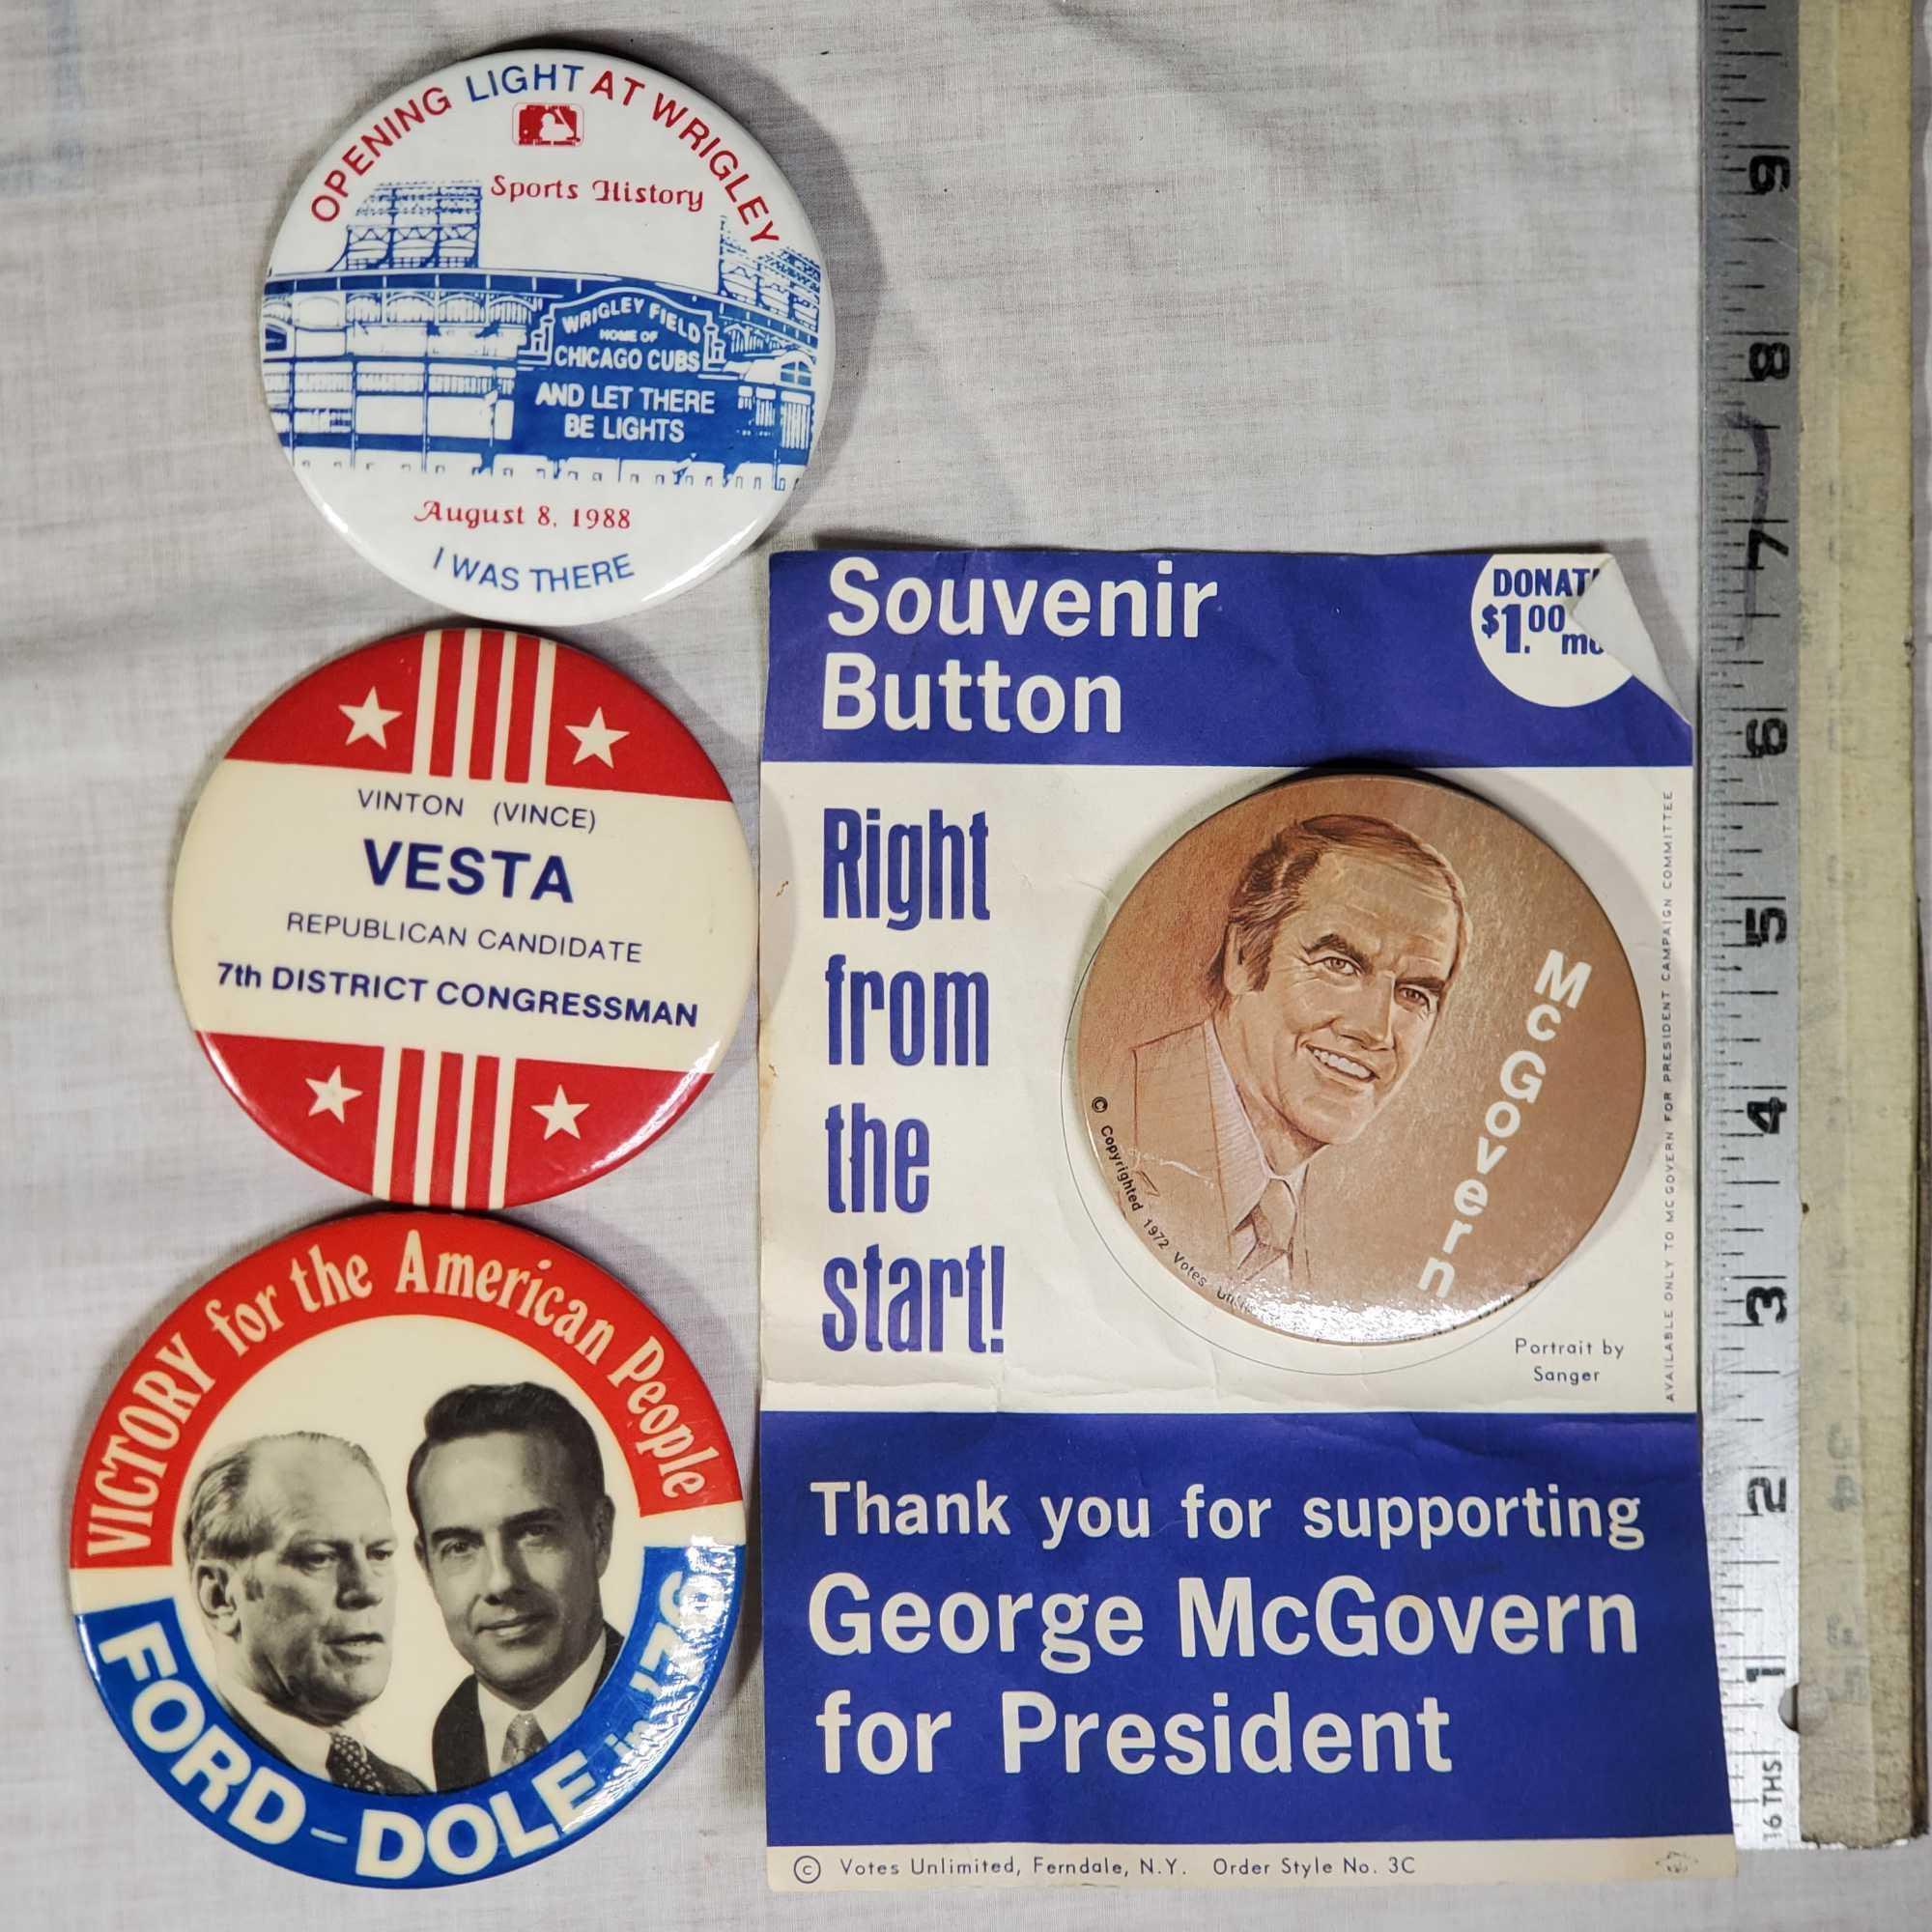 Collection Of 1957 Presidential Inagural Collectibles and other Political Ephemera